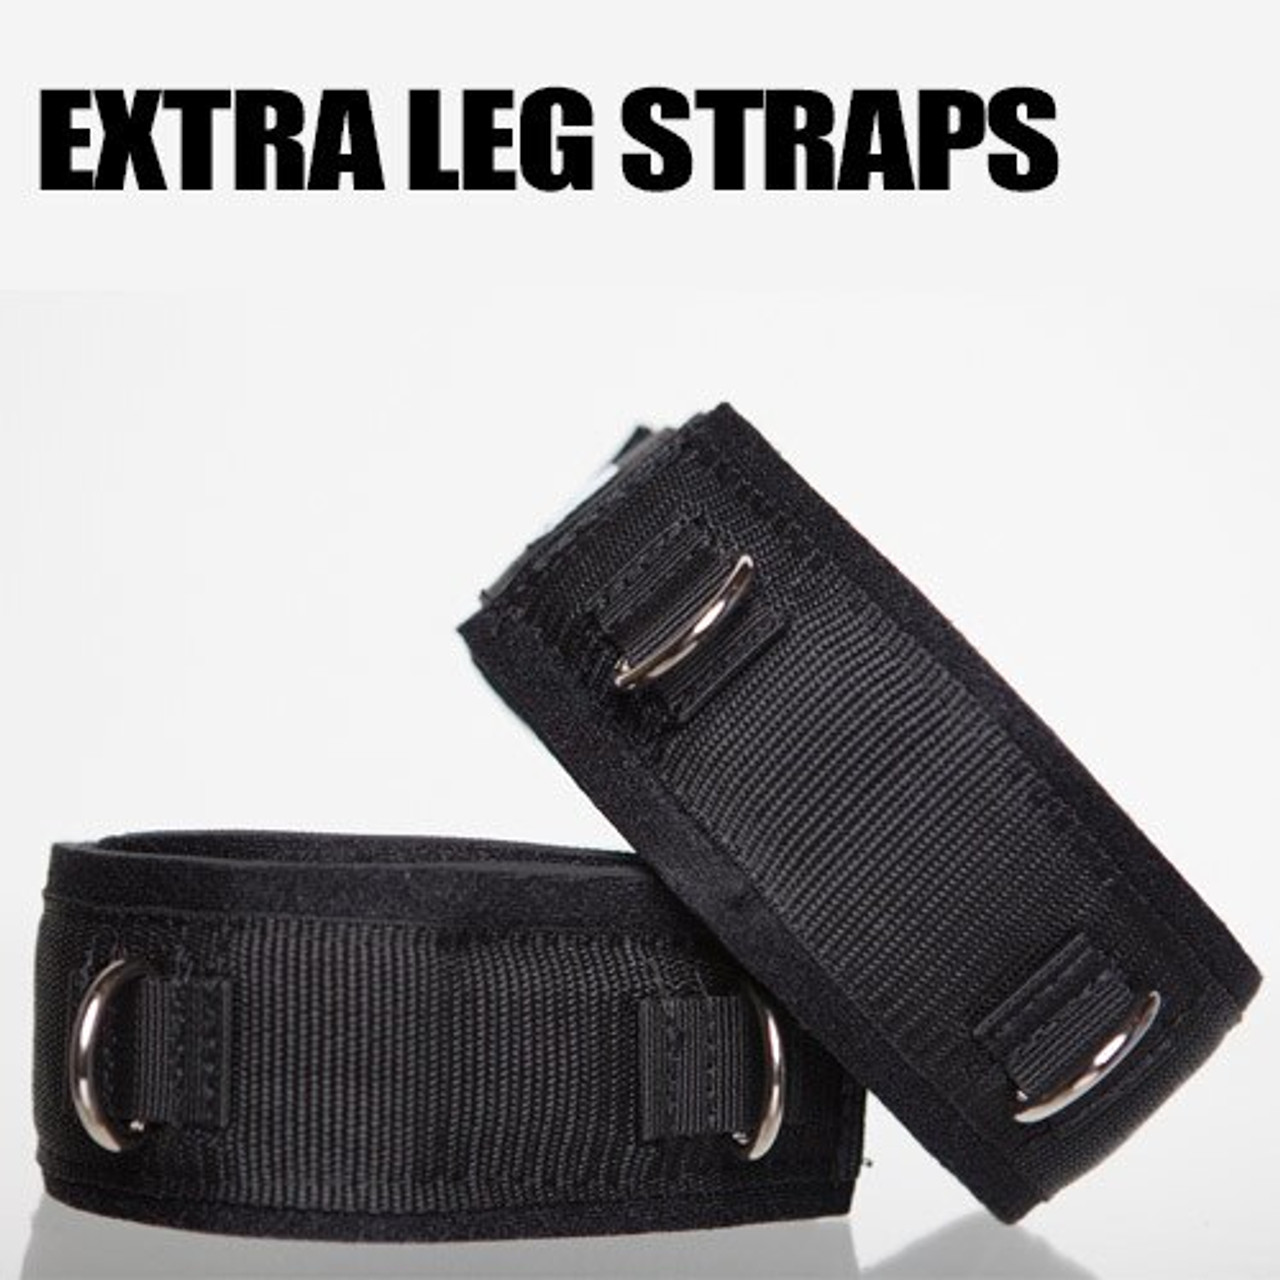 Leg Strap Compatibility Update: Do You Need the Leg Strap